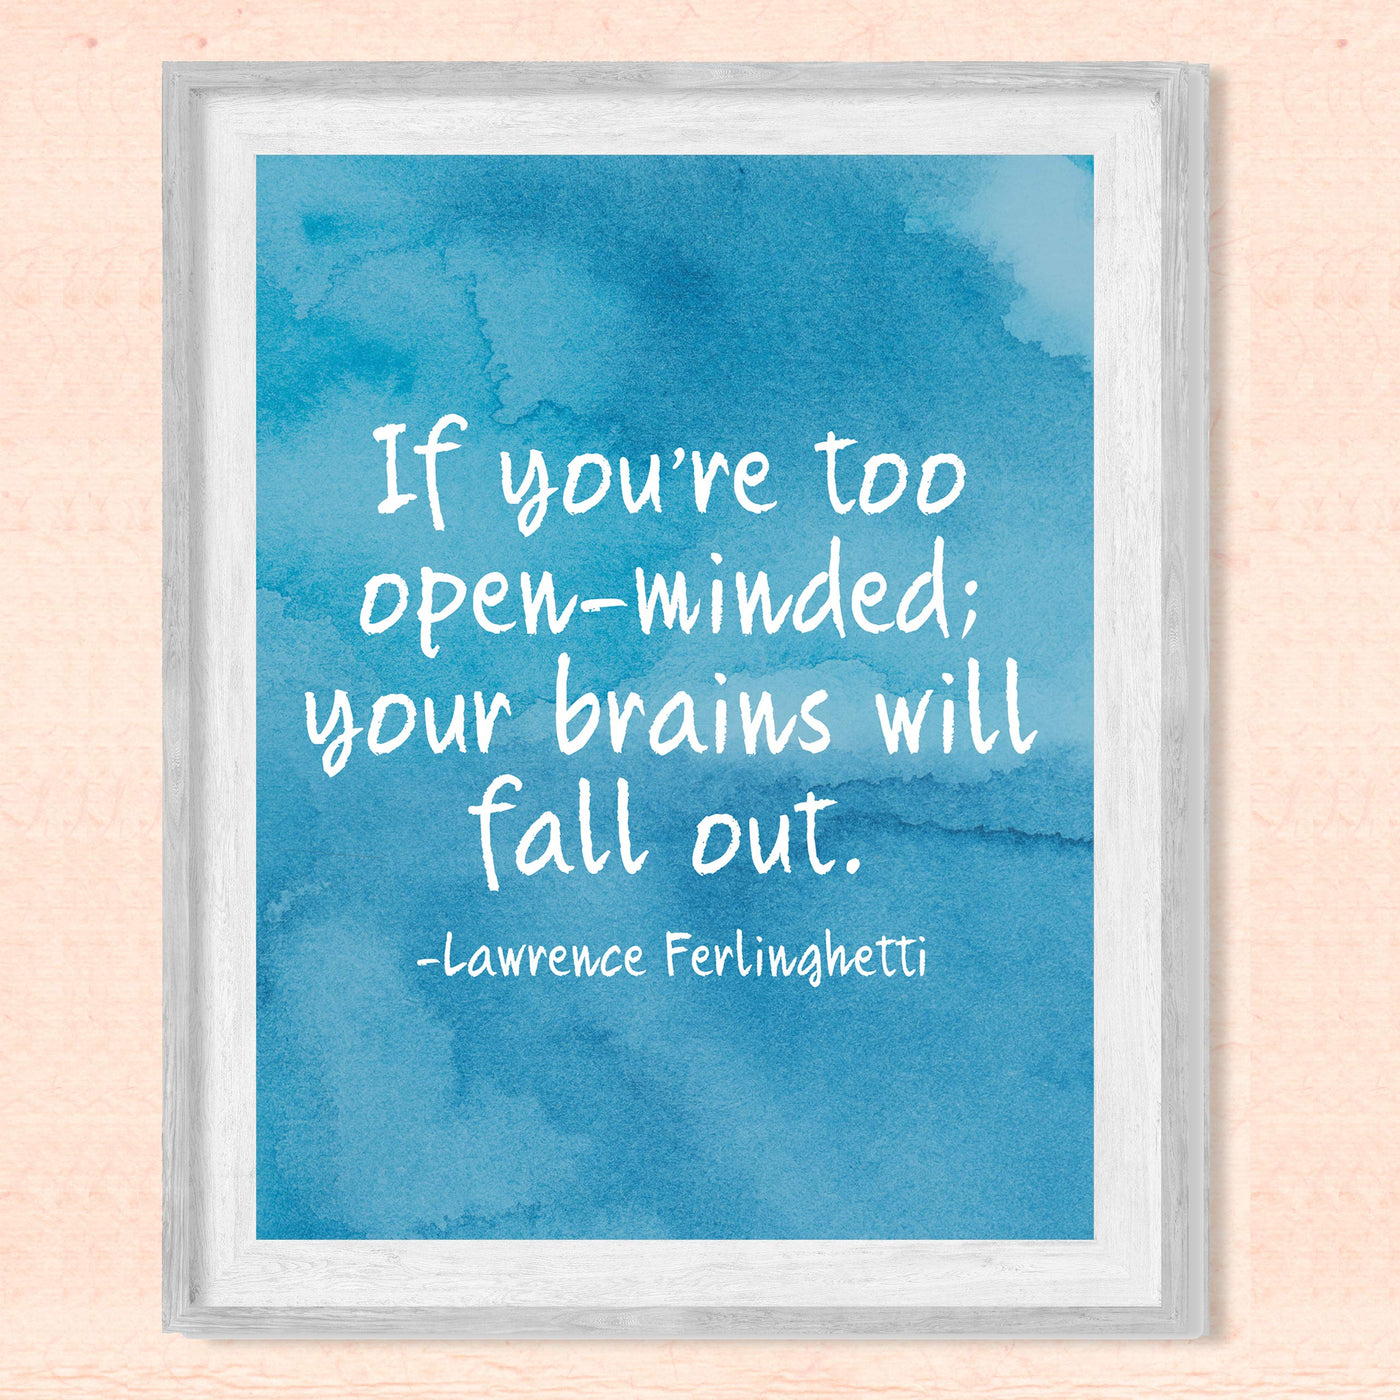 Lawrence Ferlinghetti-"If You're Too Open-Minded-Brains Will Fall Out"-Motivational Quotes Wall Sign-8 x 10" Abstract Art Print-Ready to Frame. Home-Office-Studio Decor. Great Gift for Poetry Fans!